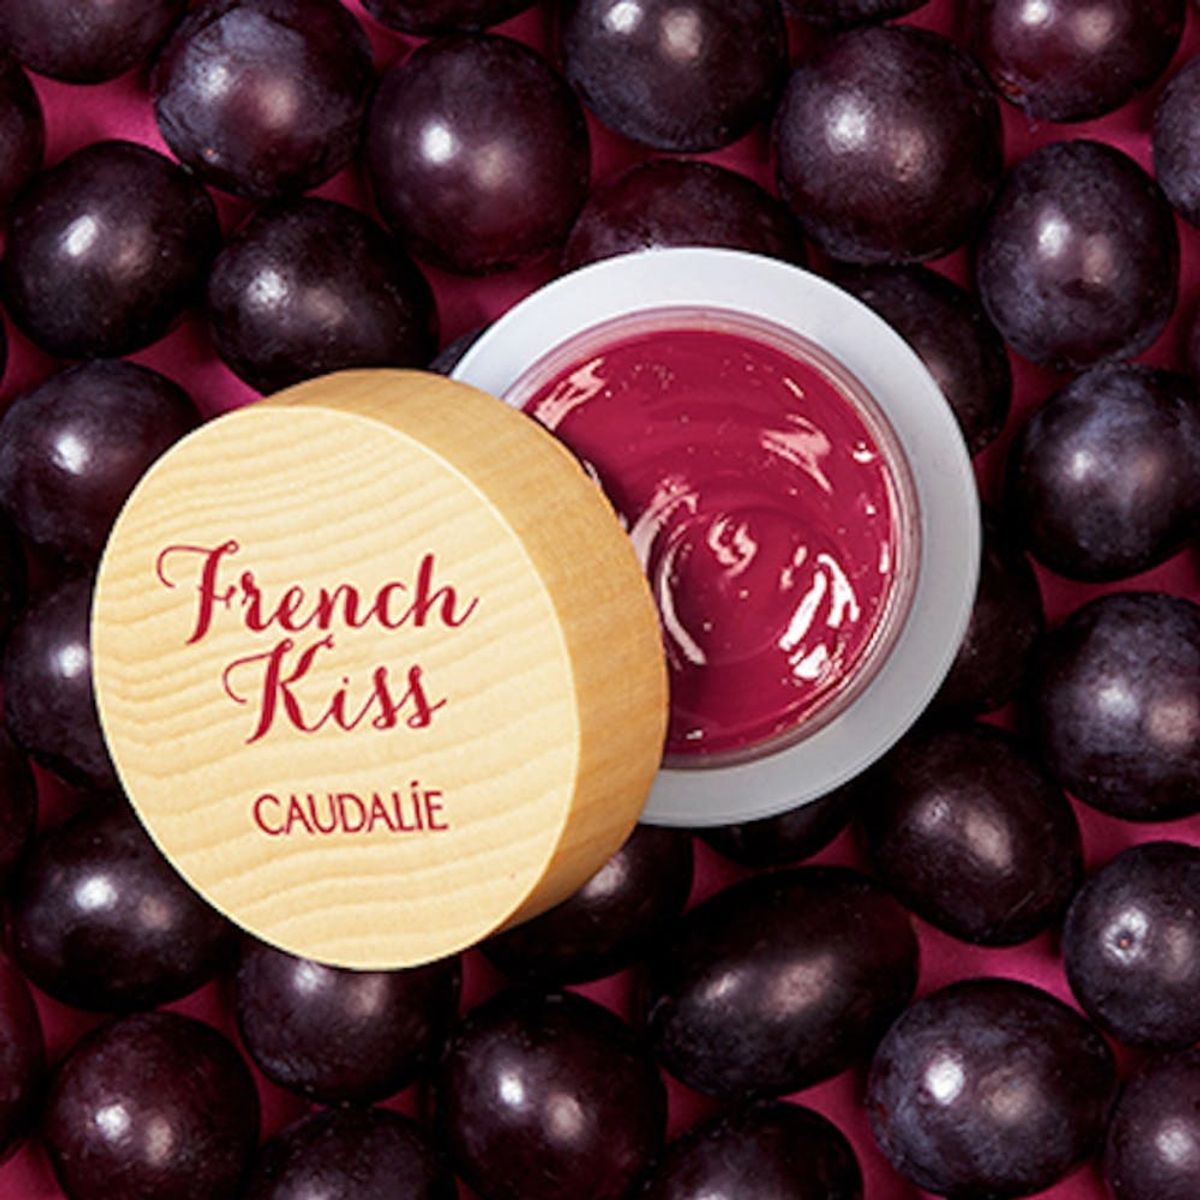 Pucker Up: This New Lip Balm Has the Same Antioxidants Found in Wine